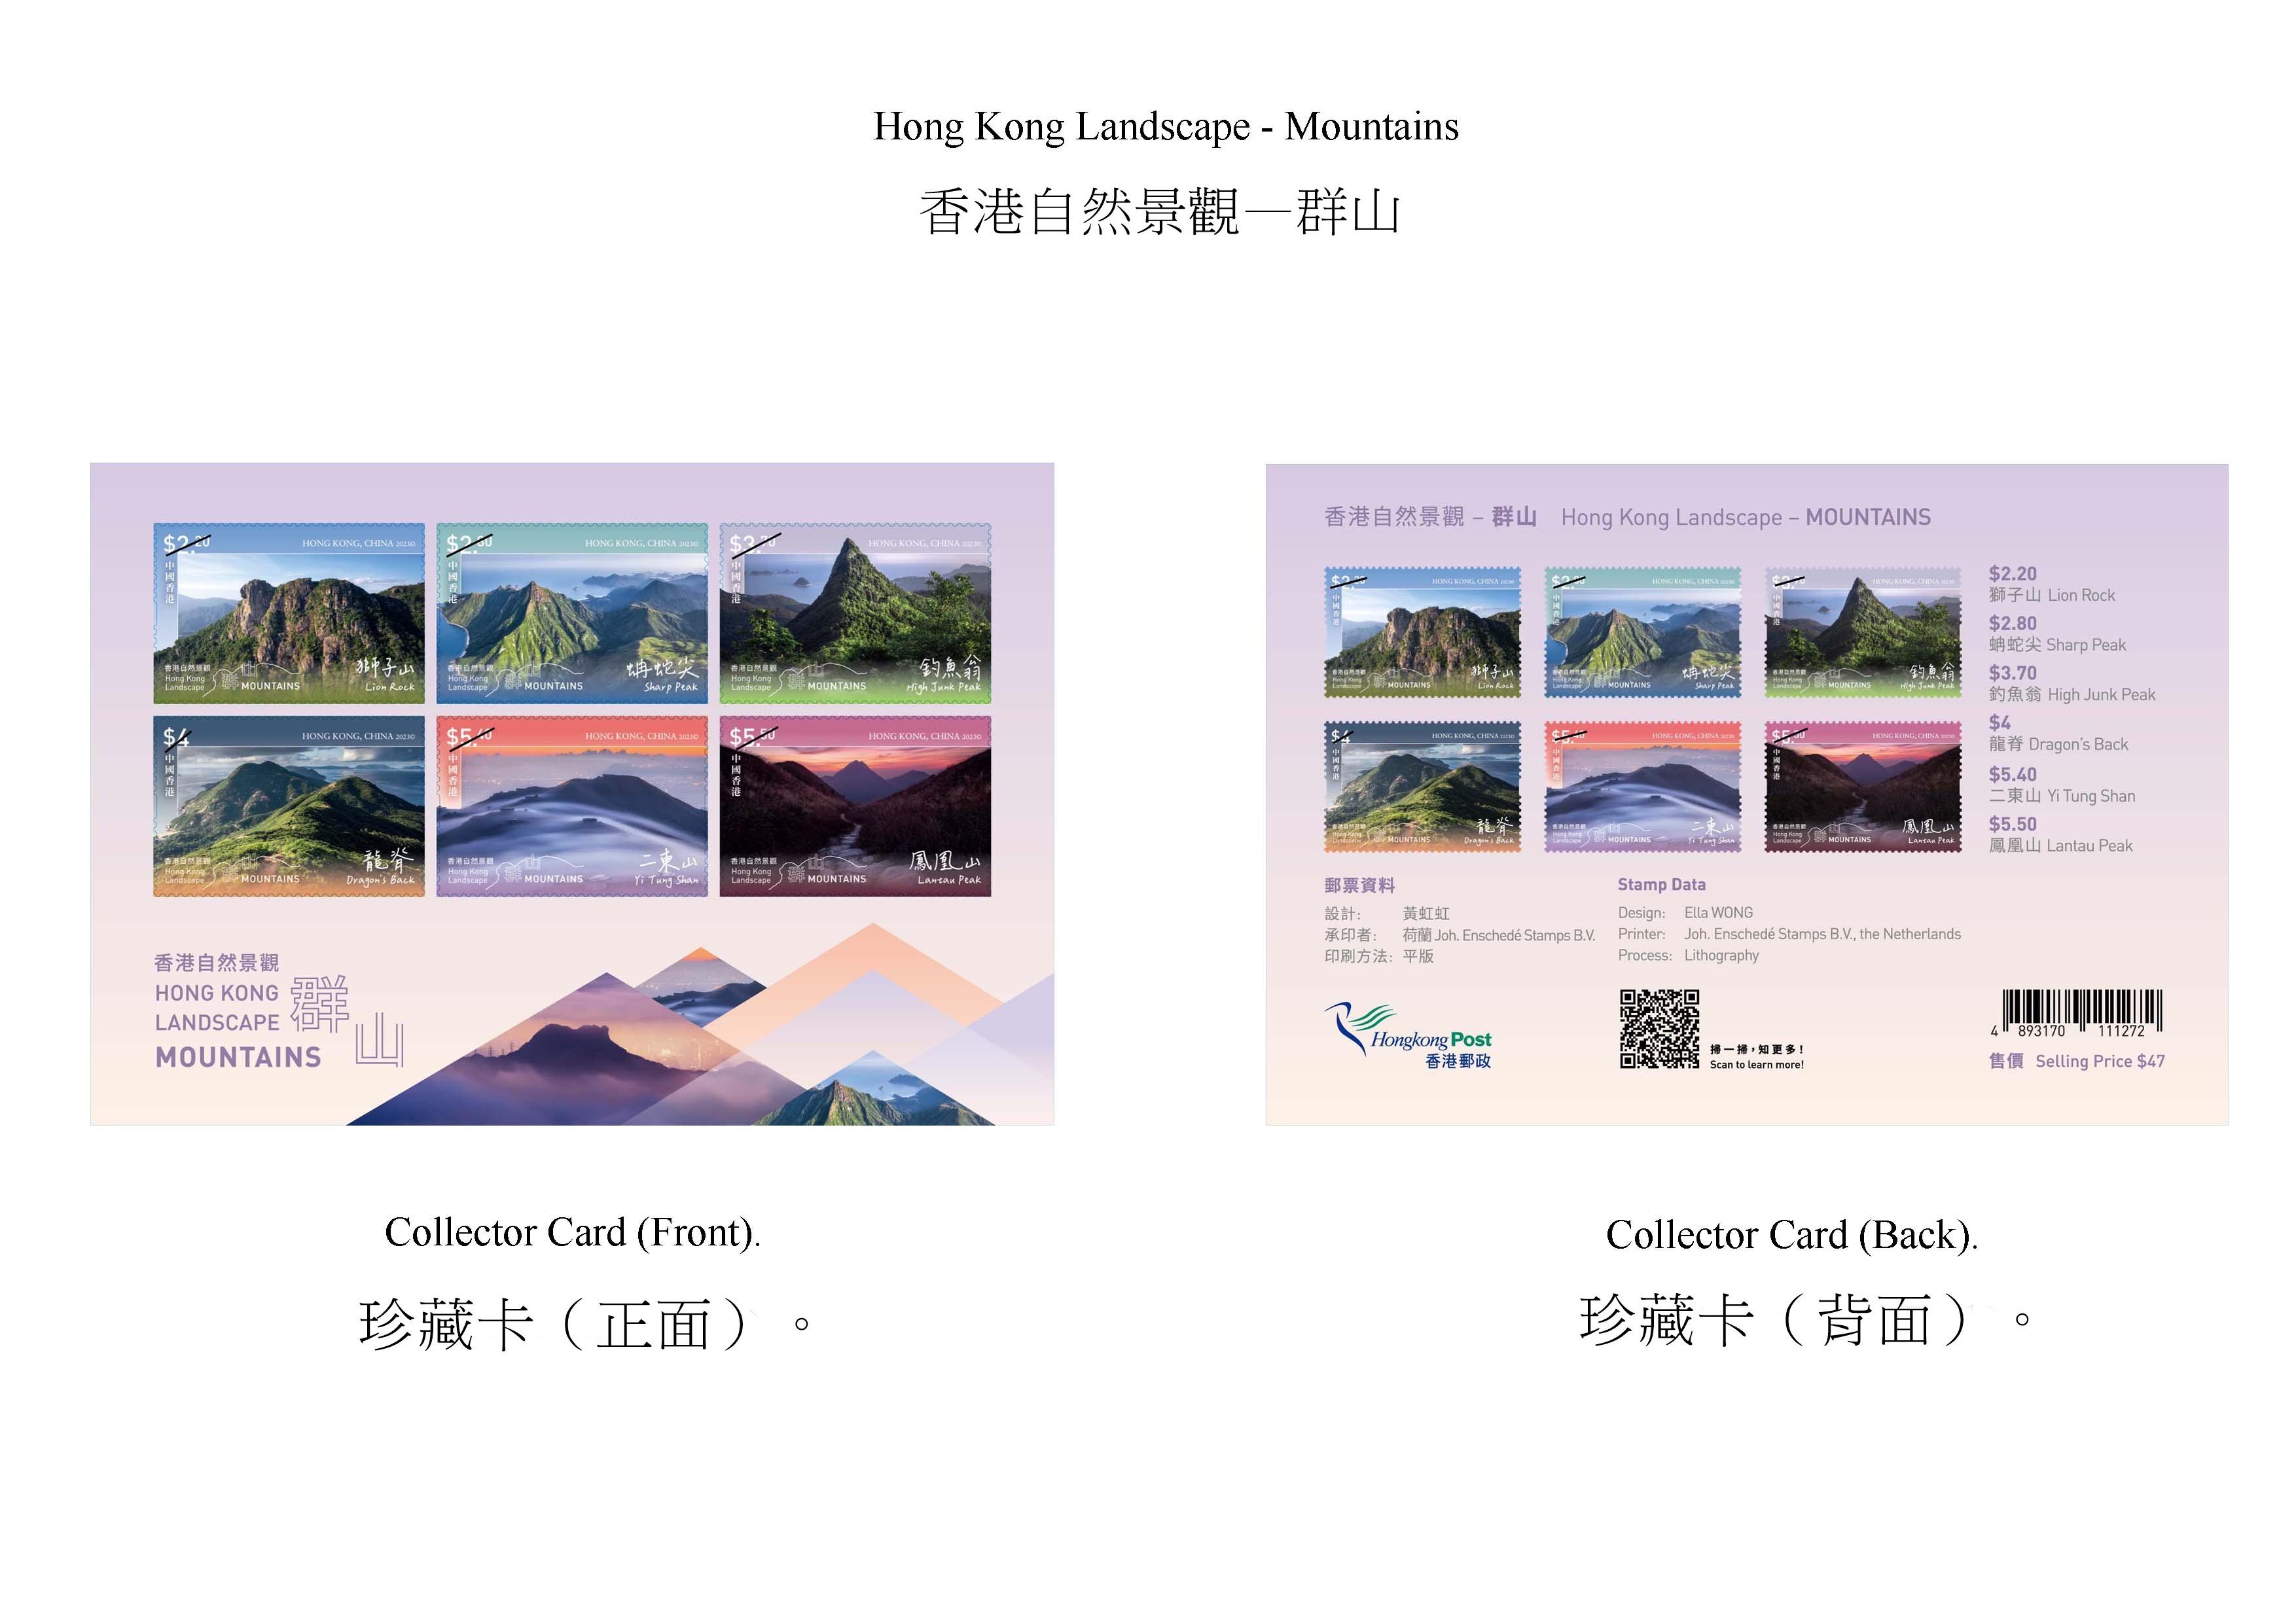 Hongkong Post will launch a special stamp issue and associated philatelic products on the theme of "Hong Kong Landscape - Mountains" on October 26 (Thursday). Photos show the collector card.

